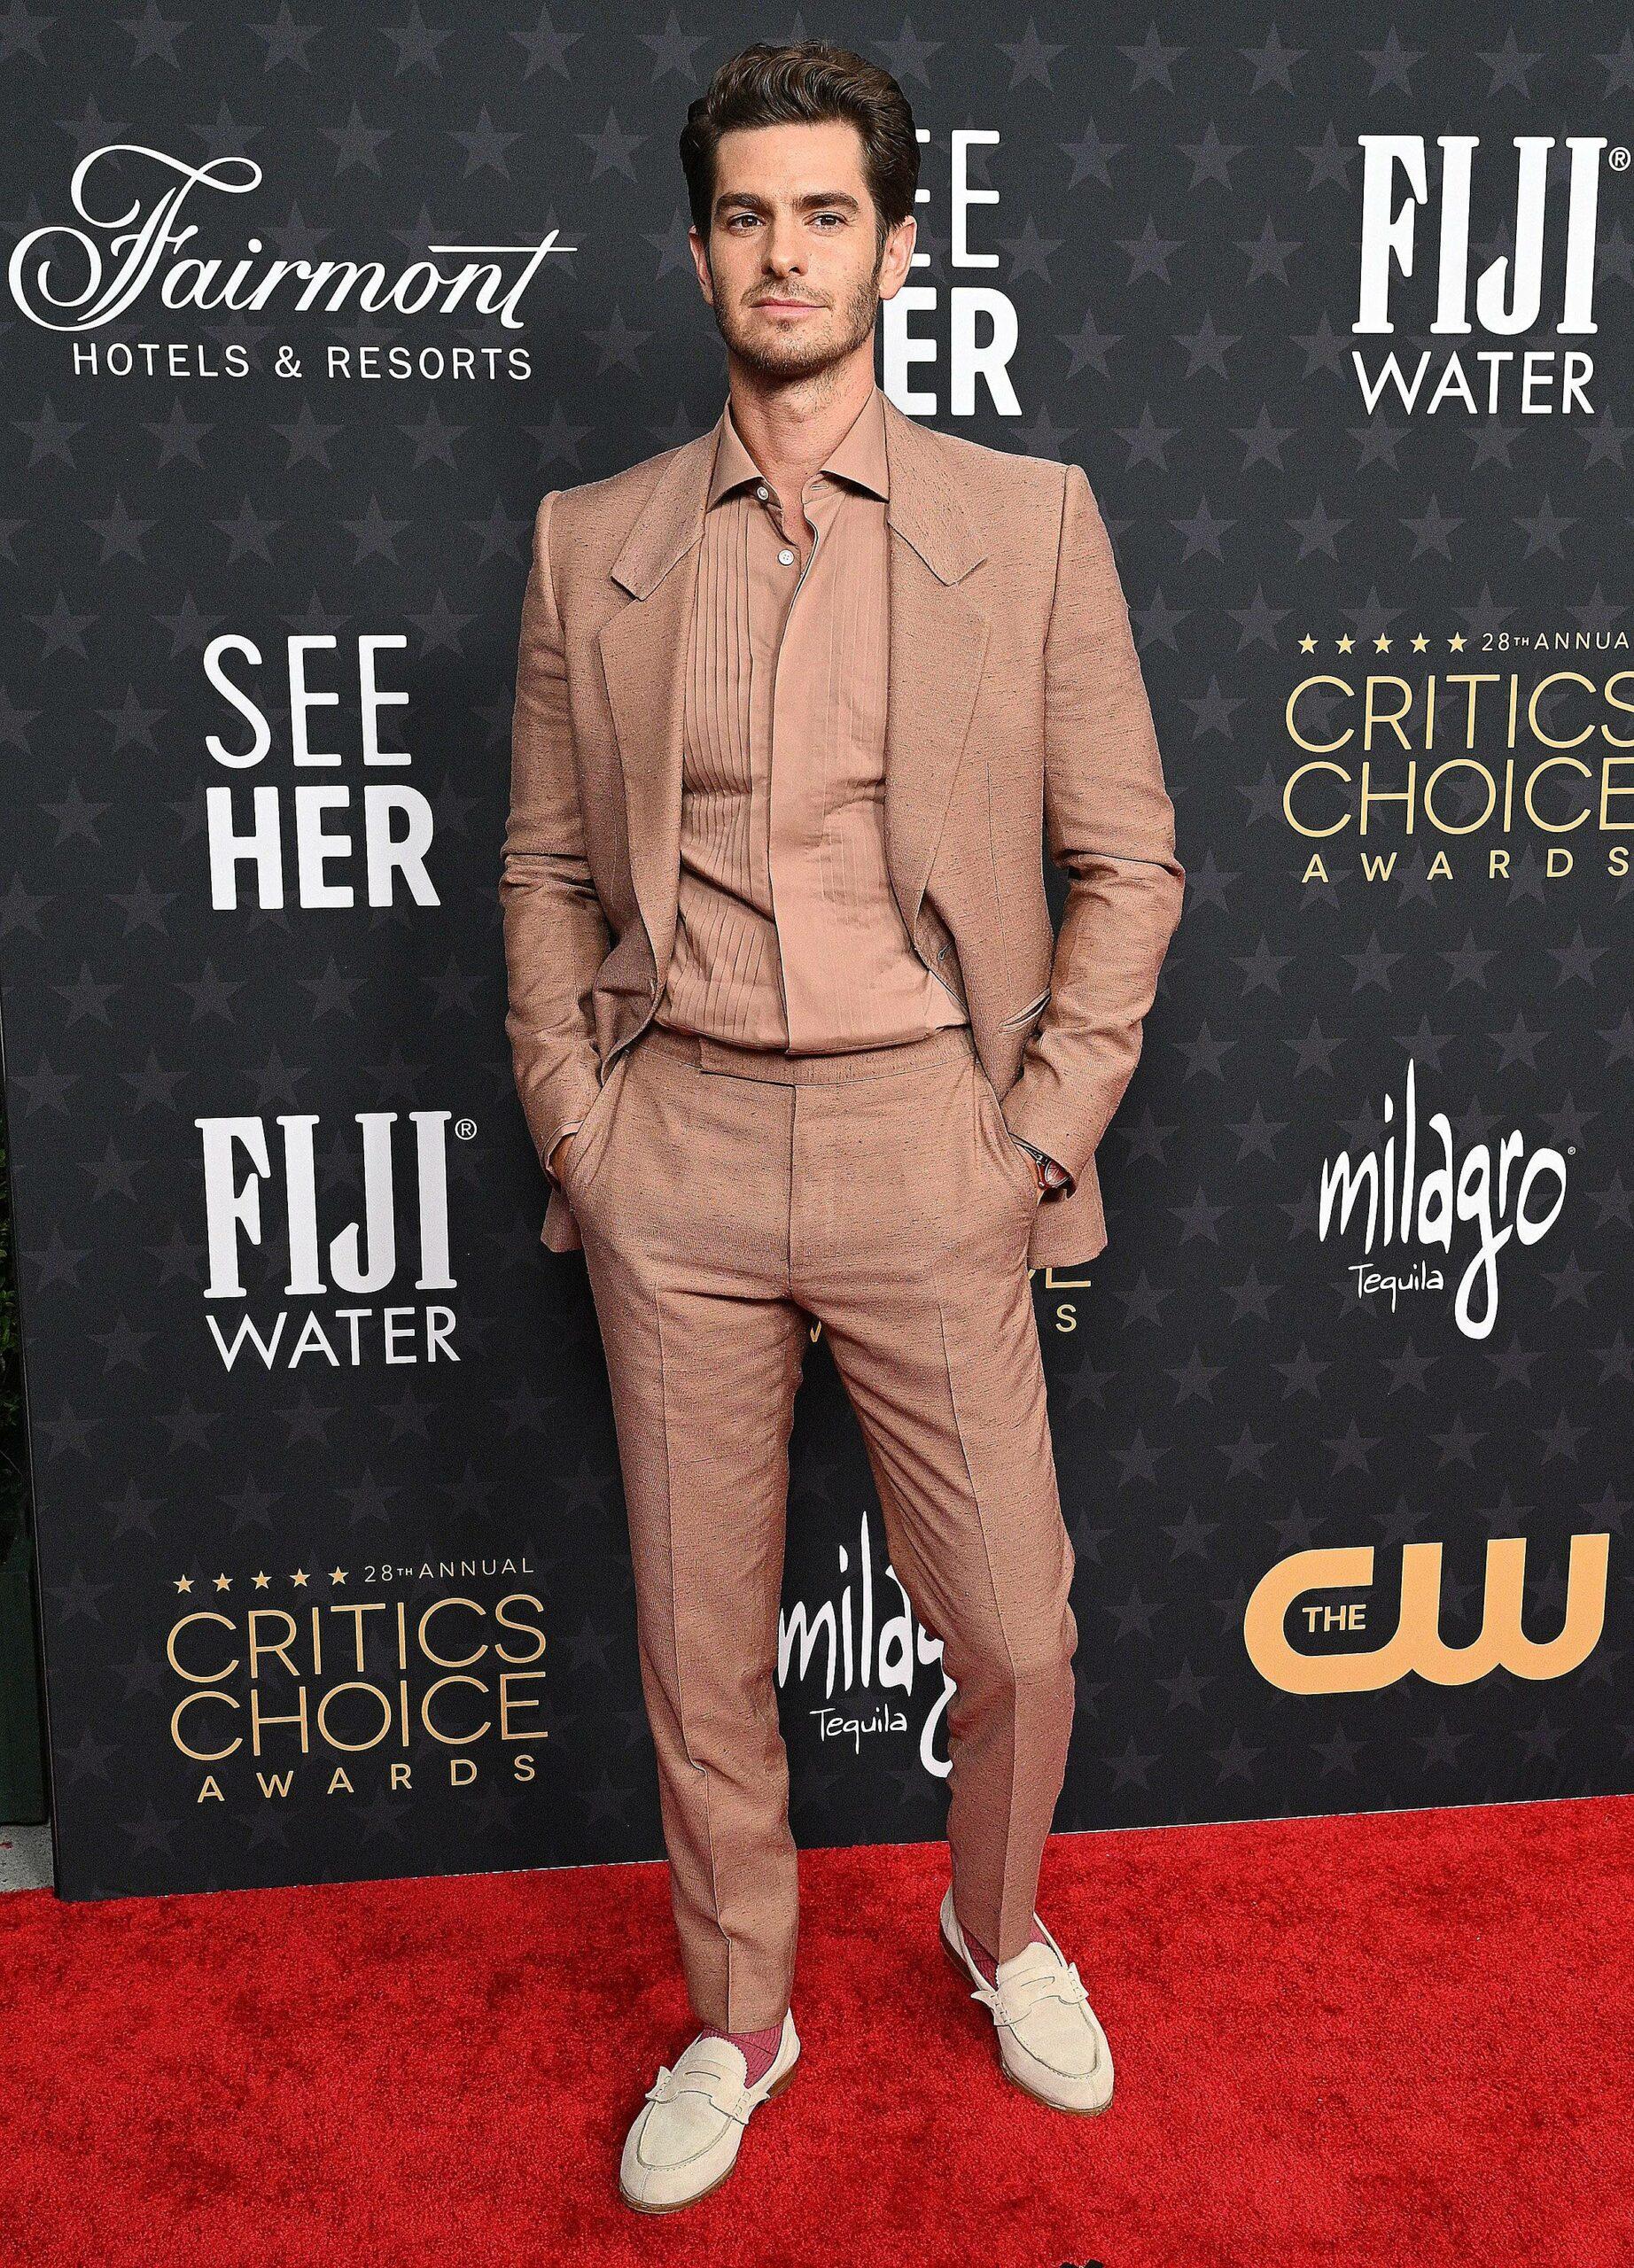 Andrew Garfield at the 28th Annual Critics' Choice Awards, Los Angeles